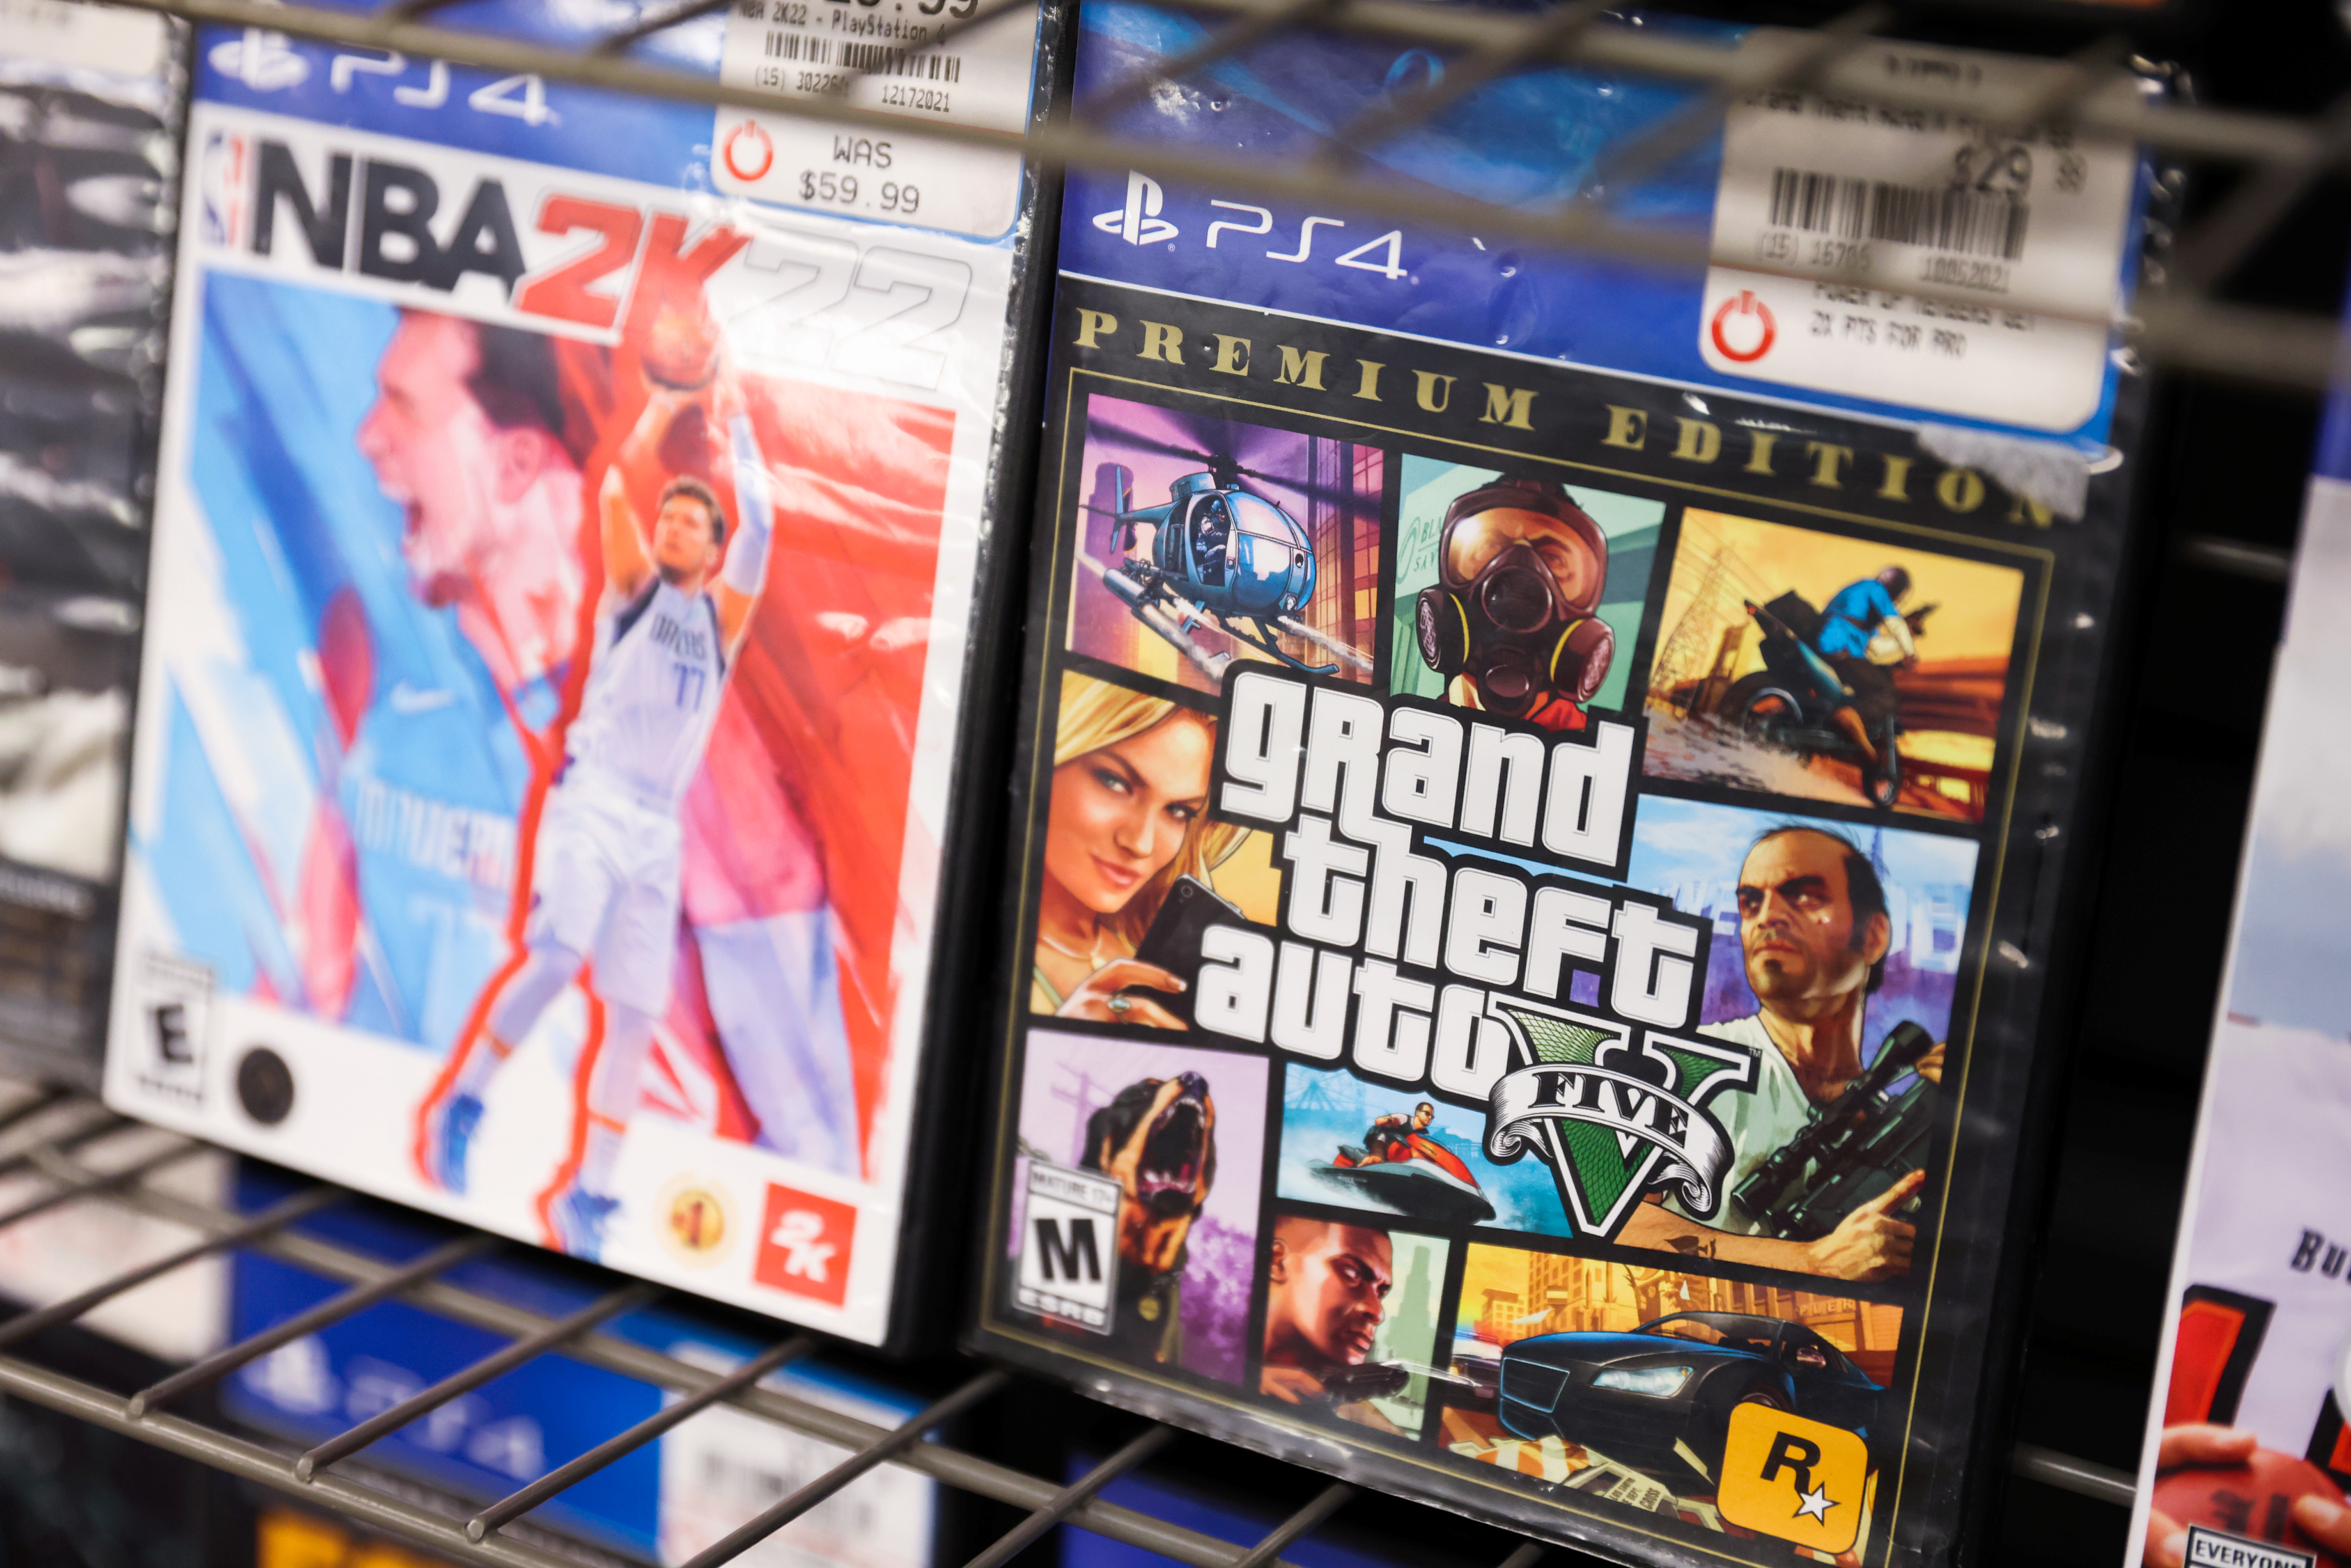 NBA 2K22 and Grand Theft Auto 5 by Take-Two Interactive Software Inc are seen for sale in a store in Manhattan, New York City